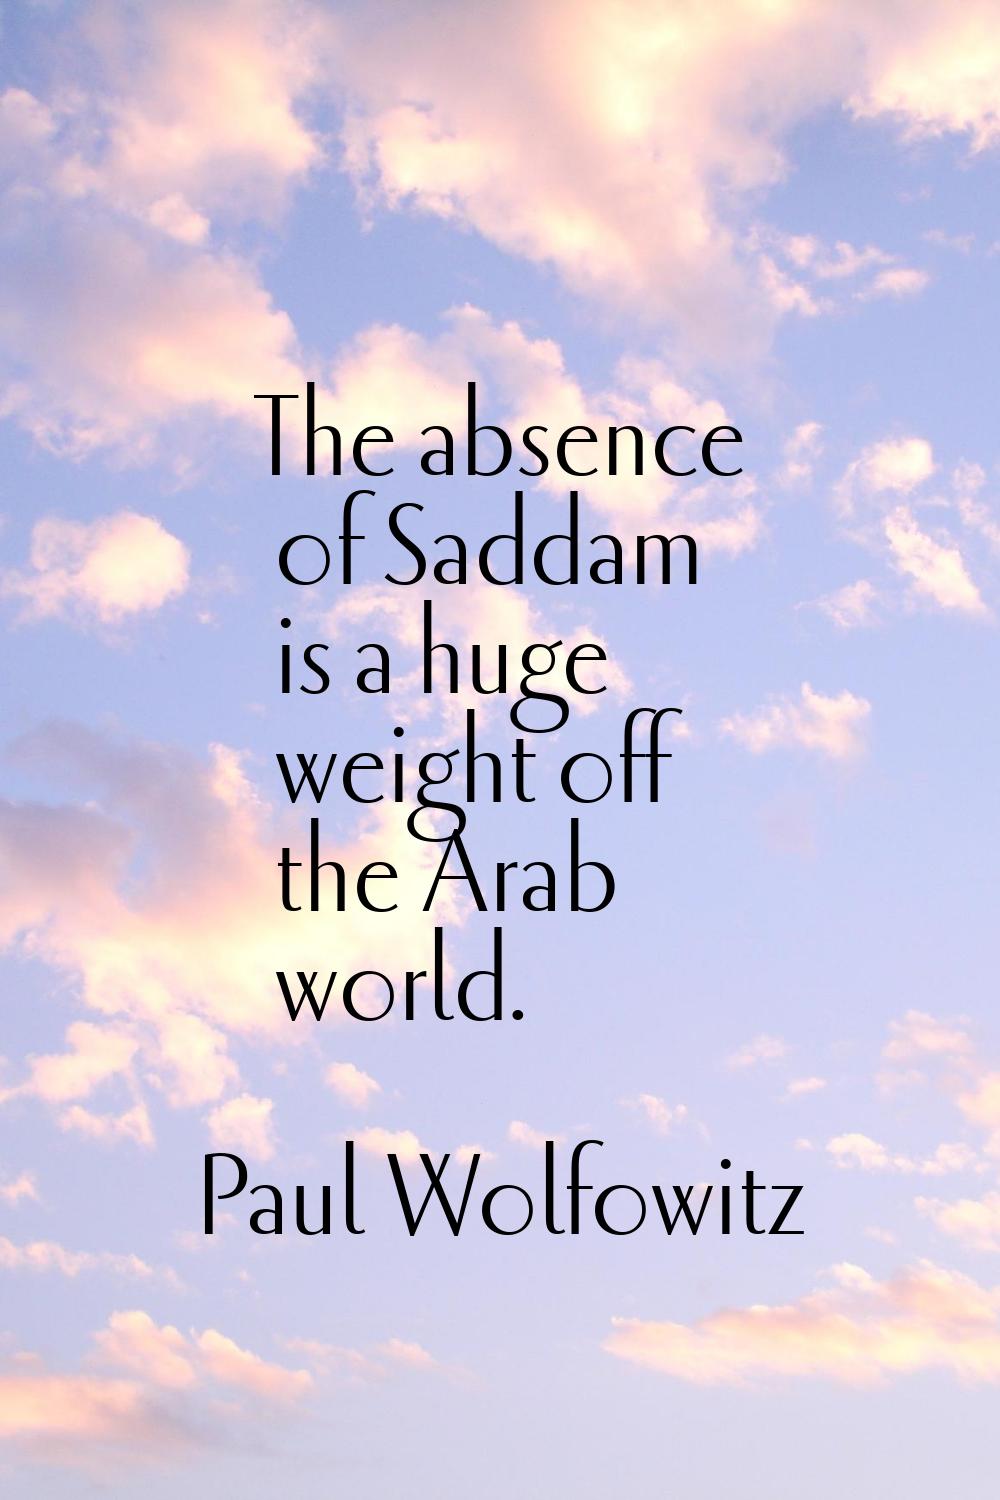 The absence of Saddam is a huge weight off the Arab world.